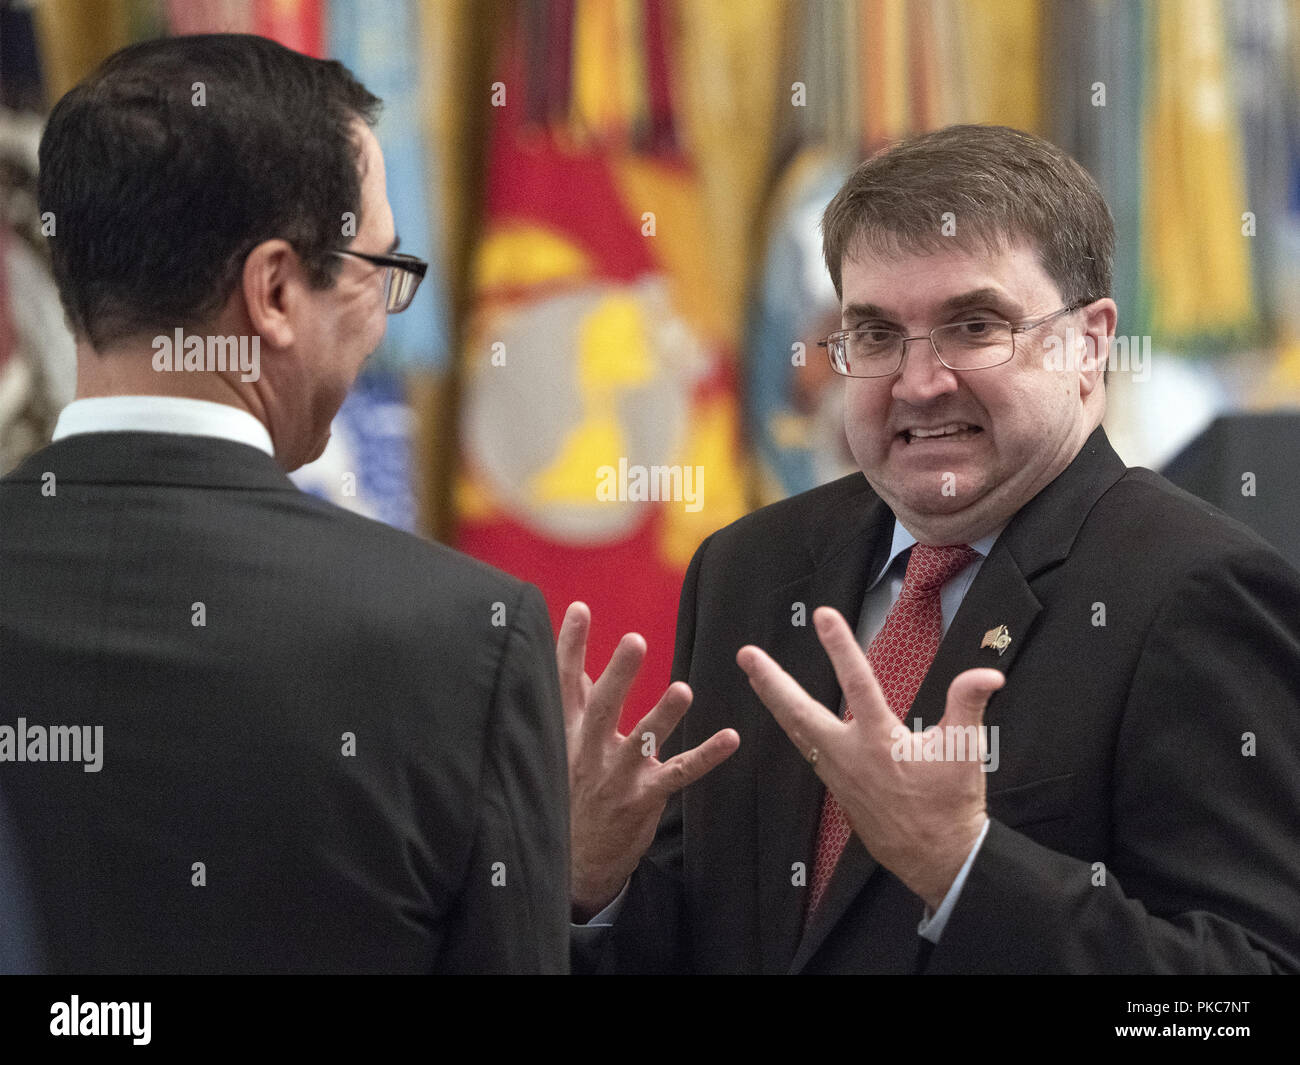 Washington, District of Columbia, USA. 12th Sep, 2018. United States Secretary of Veterans Affairs Robert Wilkie, right, in conversation with US Secretary of the Treasury Steven Mnuchin, left, prior to the arrival of US President Donald J. Trump who will make remarks at the Congressional Medal of Honor Society Reception in the East Room of the White House in Washington, DC on Wednesday, September 12, 2018 Credit: Ron Sachs/CNP/ZUMA Wire/Alamy Live News Stock Photo